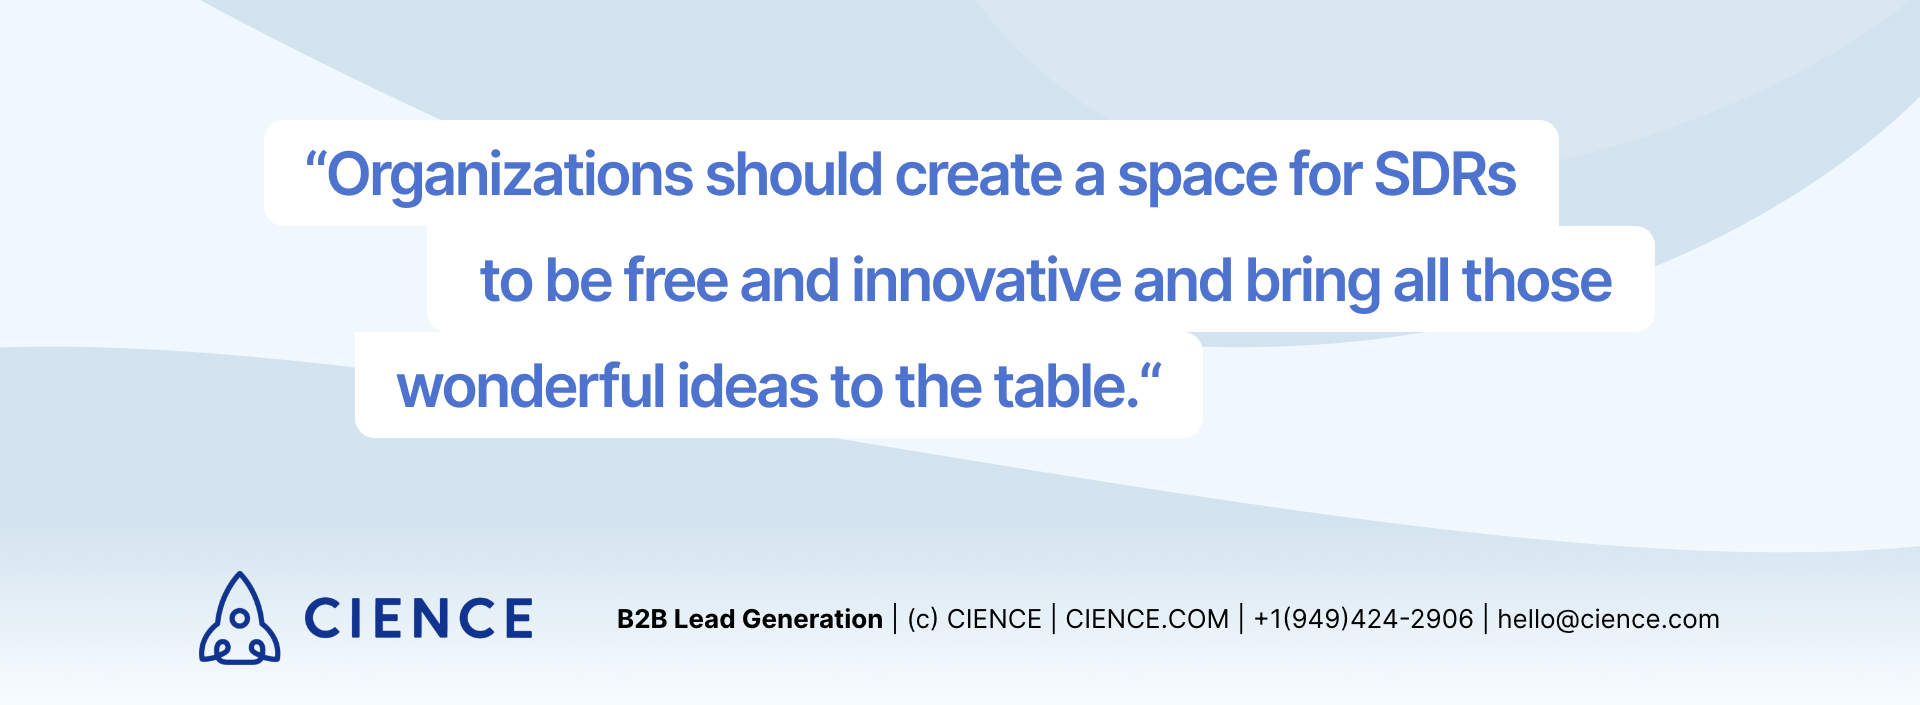 Organizations should create a space for SDRs to be free and innovative and bring all those wonderful ideas to the table.